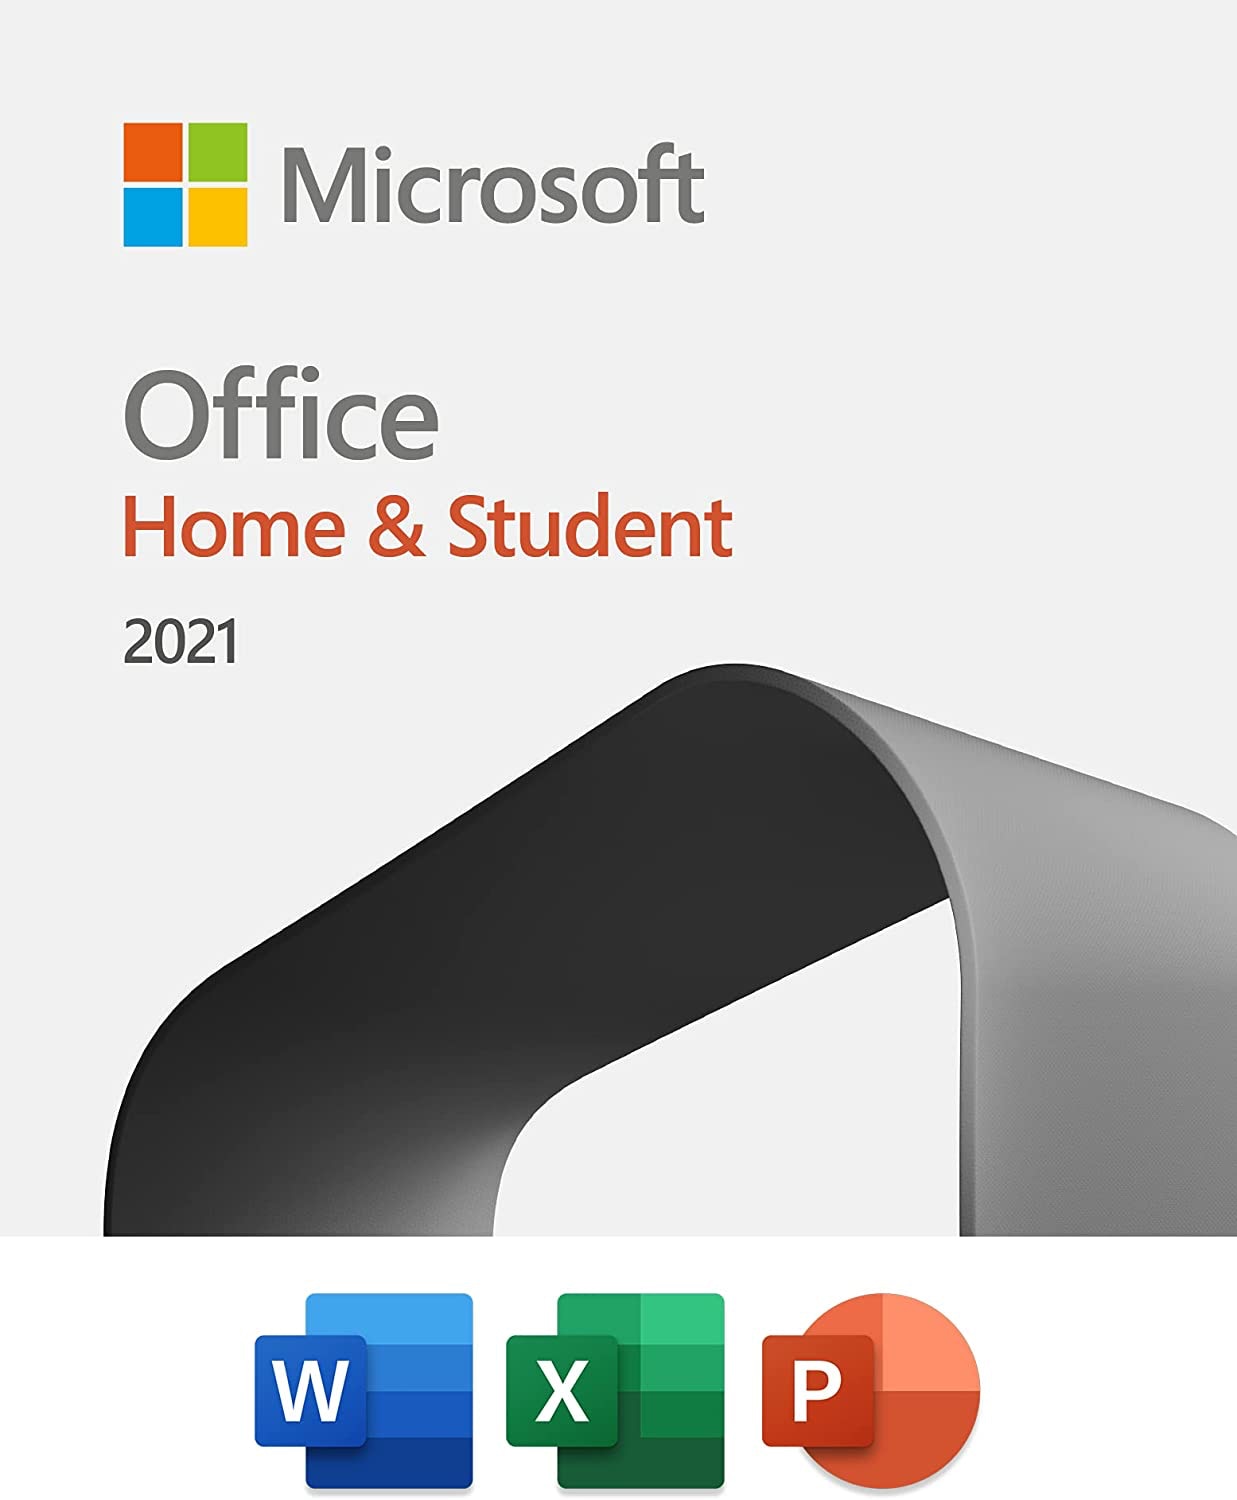 Microsoft Office Home & Student 2021 for Mac or Windows - 1 TIME PURCHASE